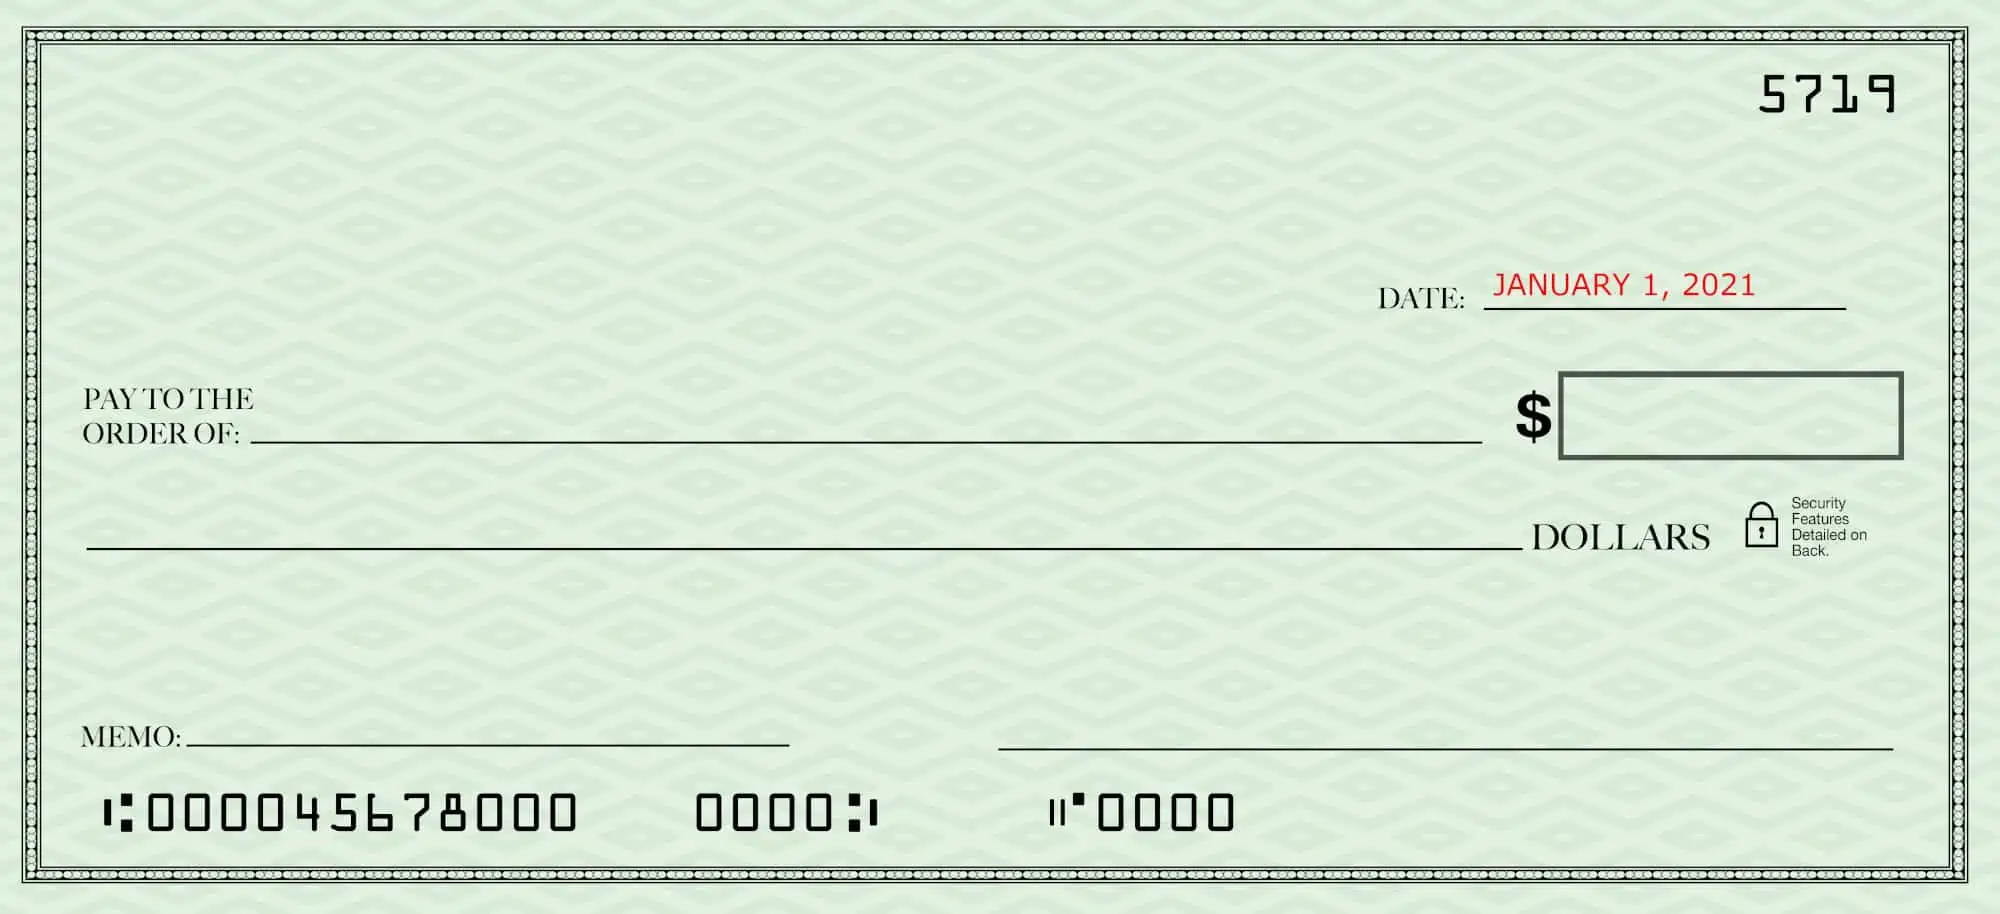 Filling out a check--blank check with just the date filled in